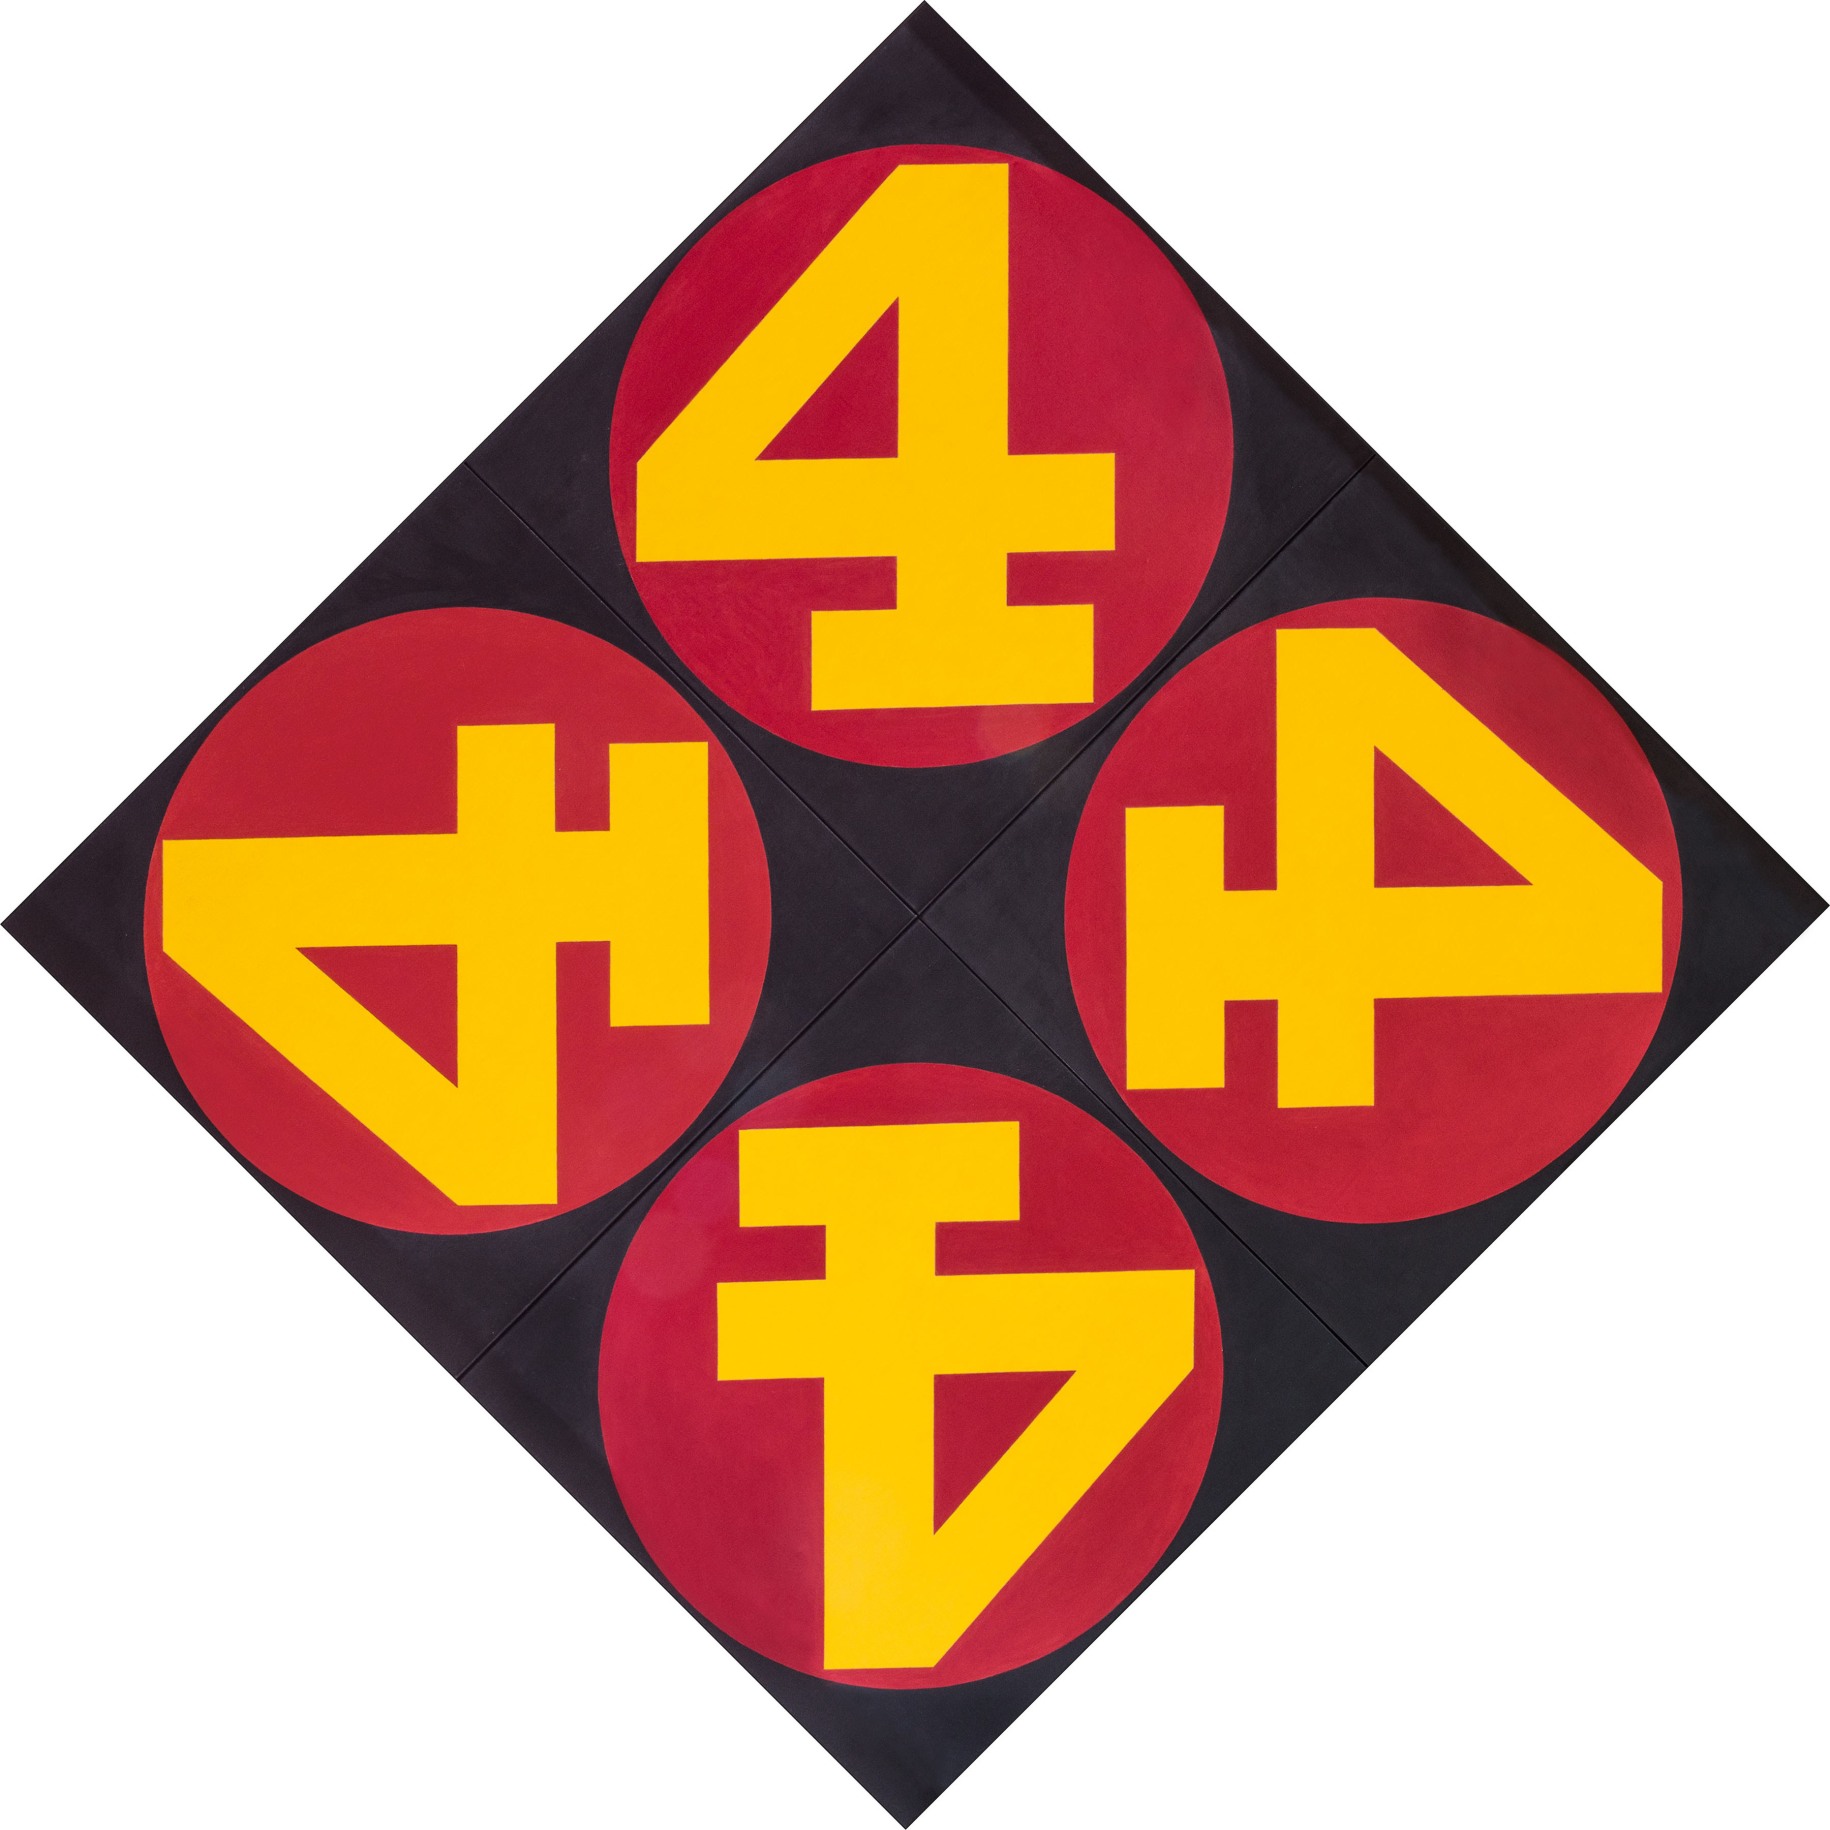 The Big Four, a diamond shaped painting consisting of four diamond shaped panels, each with a yellow numeral four in a red circle. Each four faces a different direction.